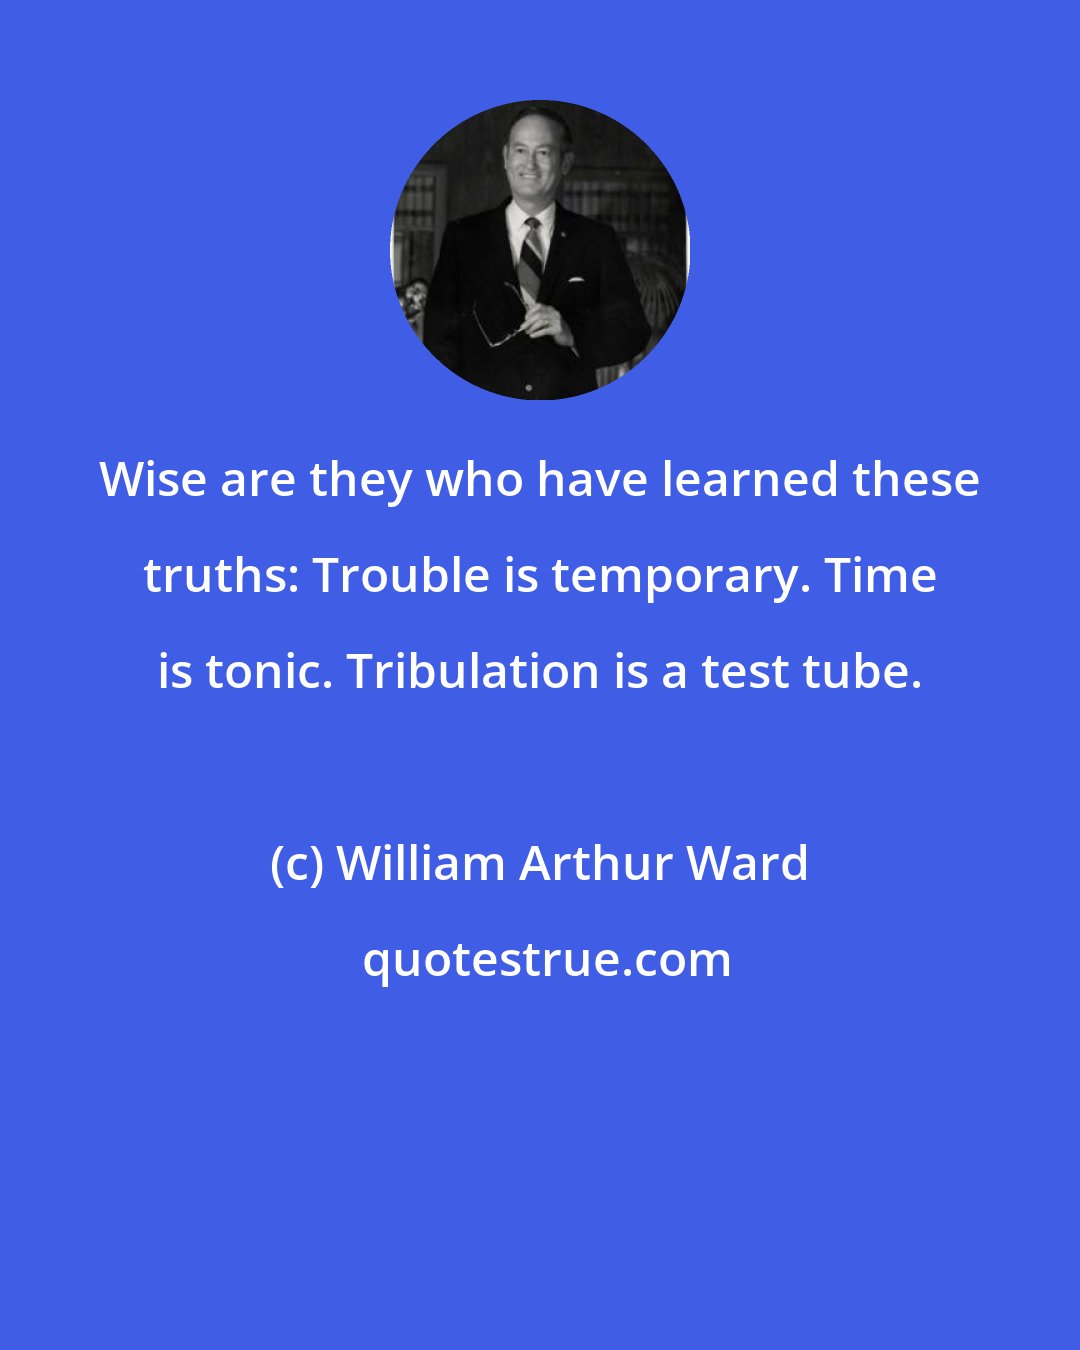 William Arthur Ward: Wise are they who have learned these truths: Trouble is temporary. Time is tonic. Tribulation is a test tube.